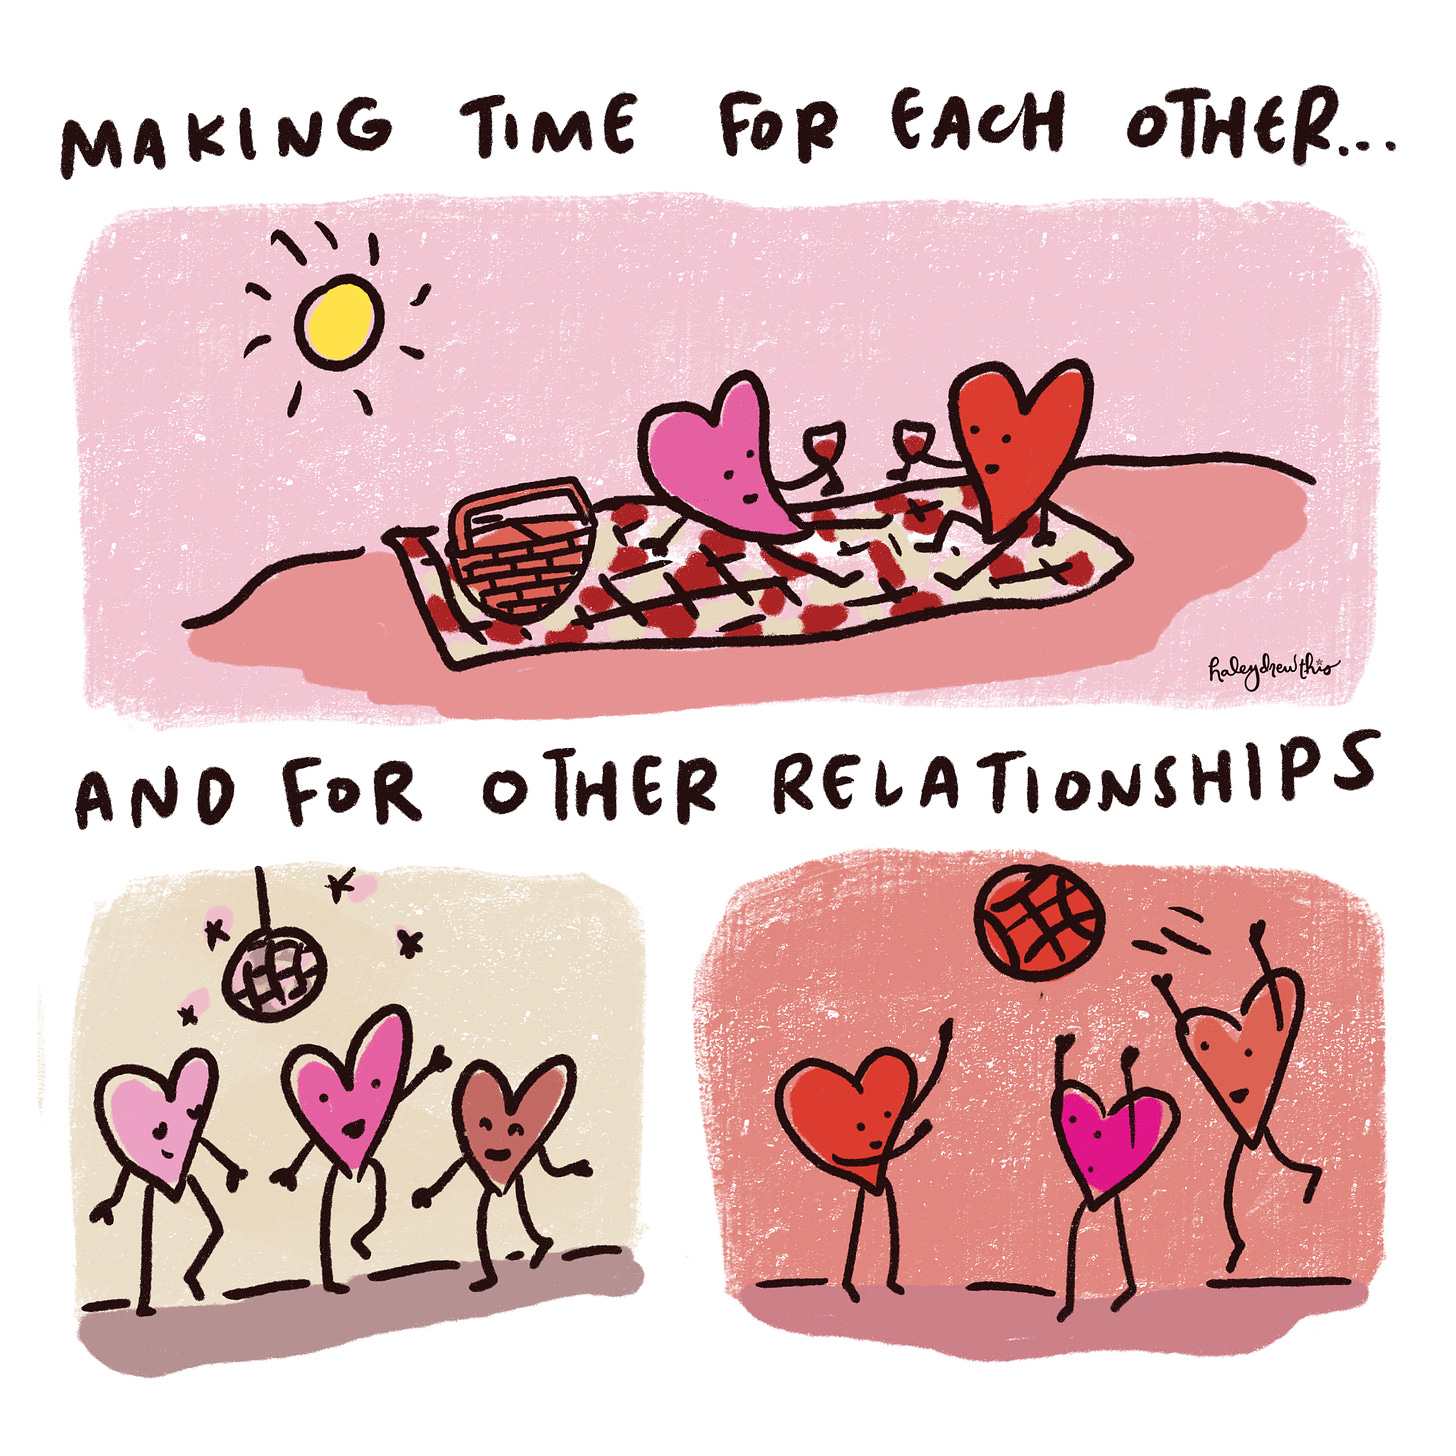 Making time for each other and for other relationships